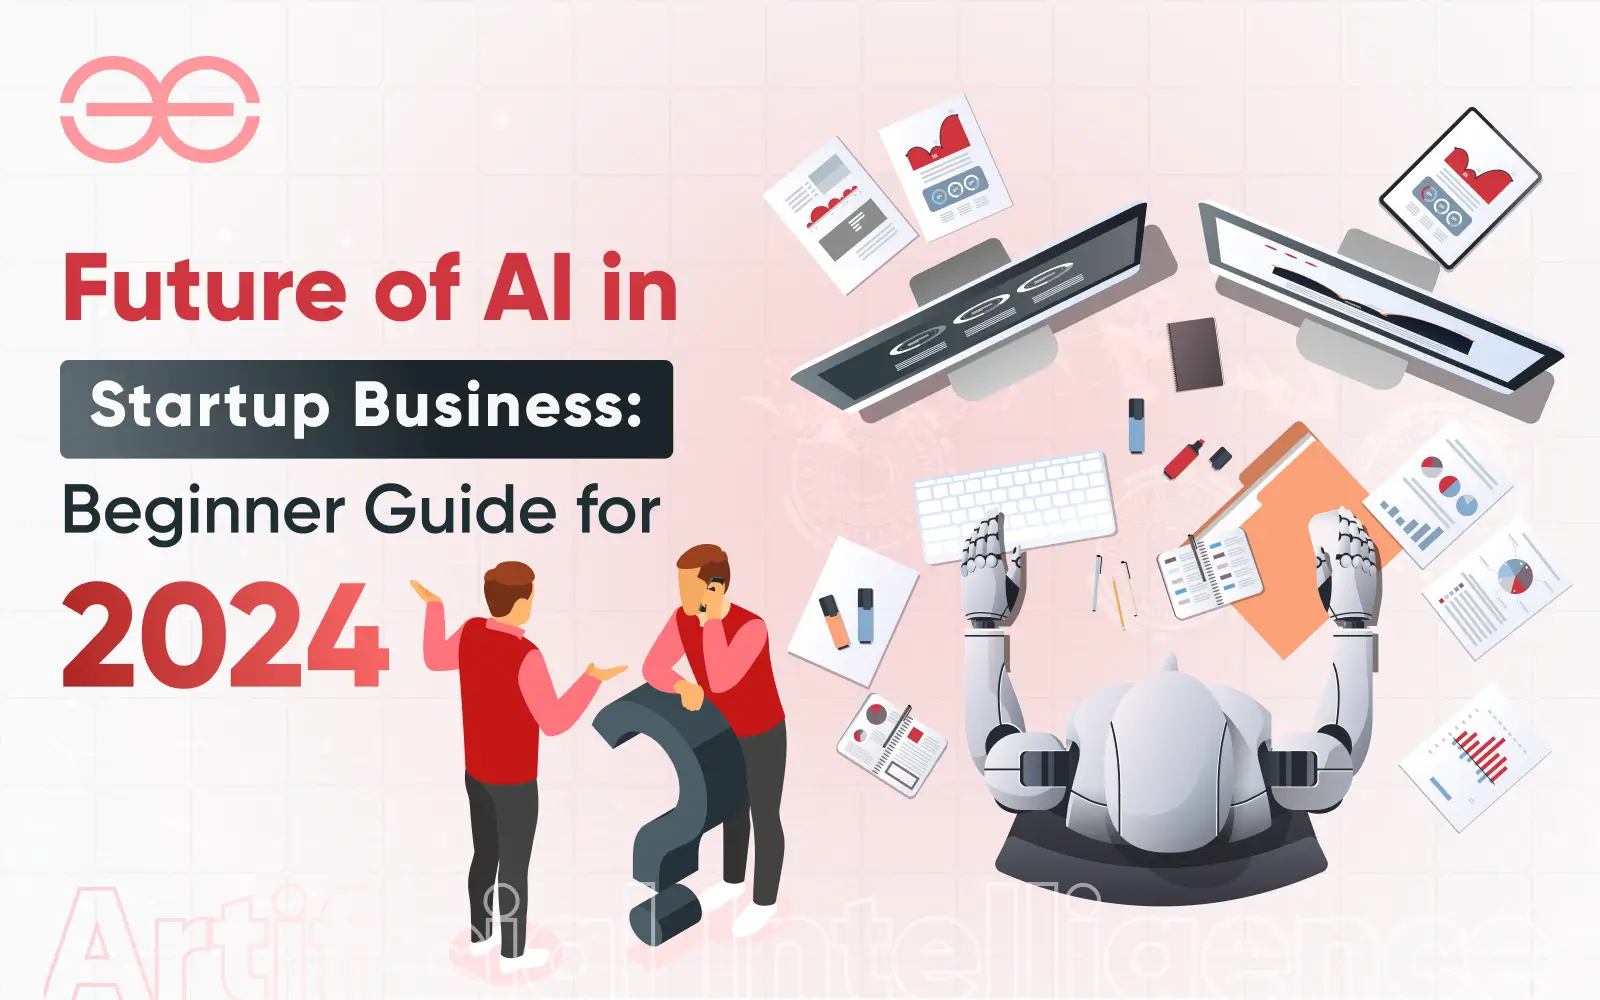 Future-of-AI-In-startup-business-beginerr-guide-for-2024